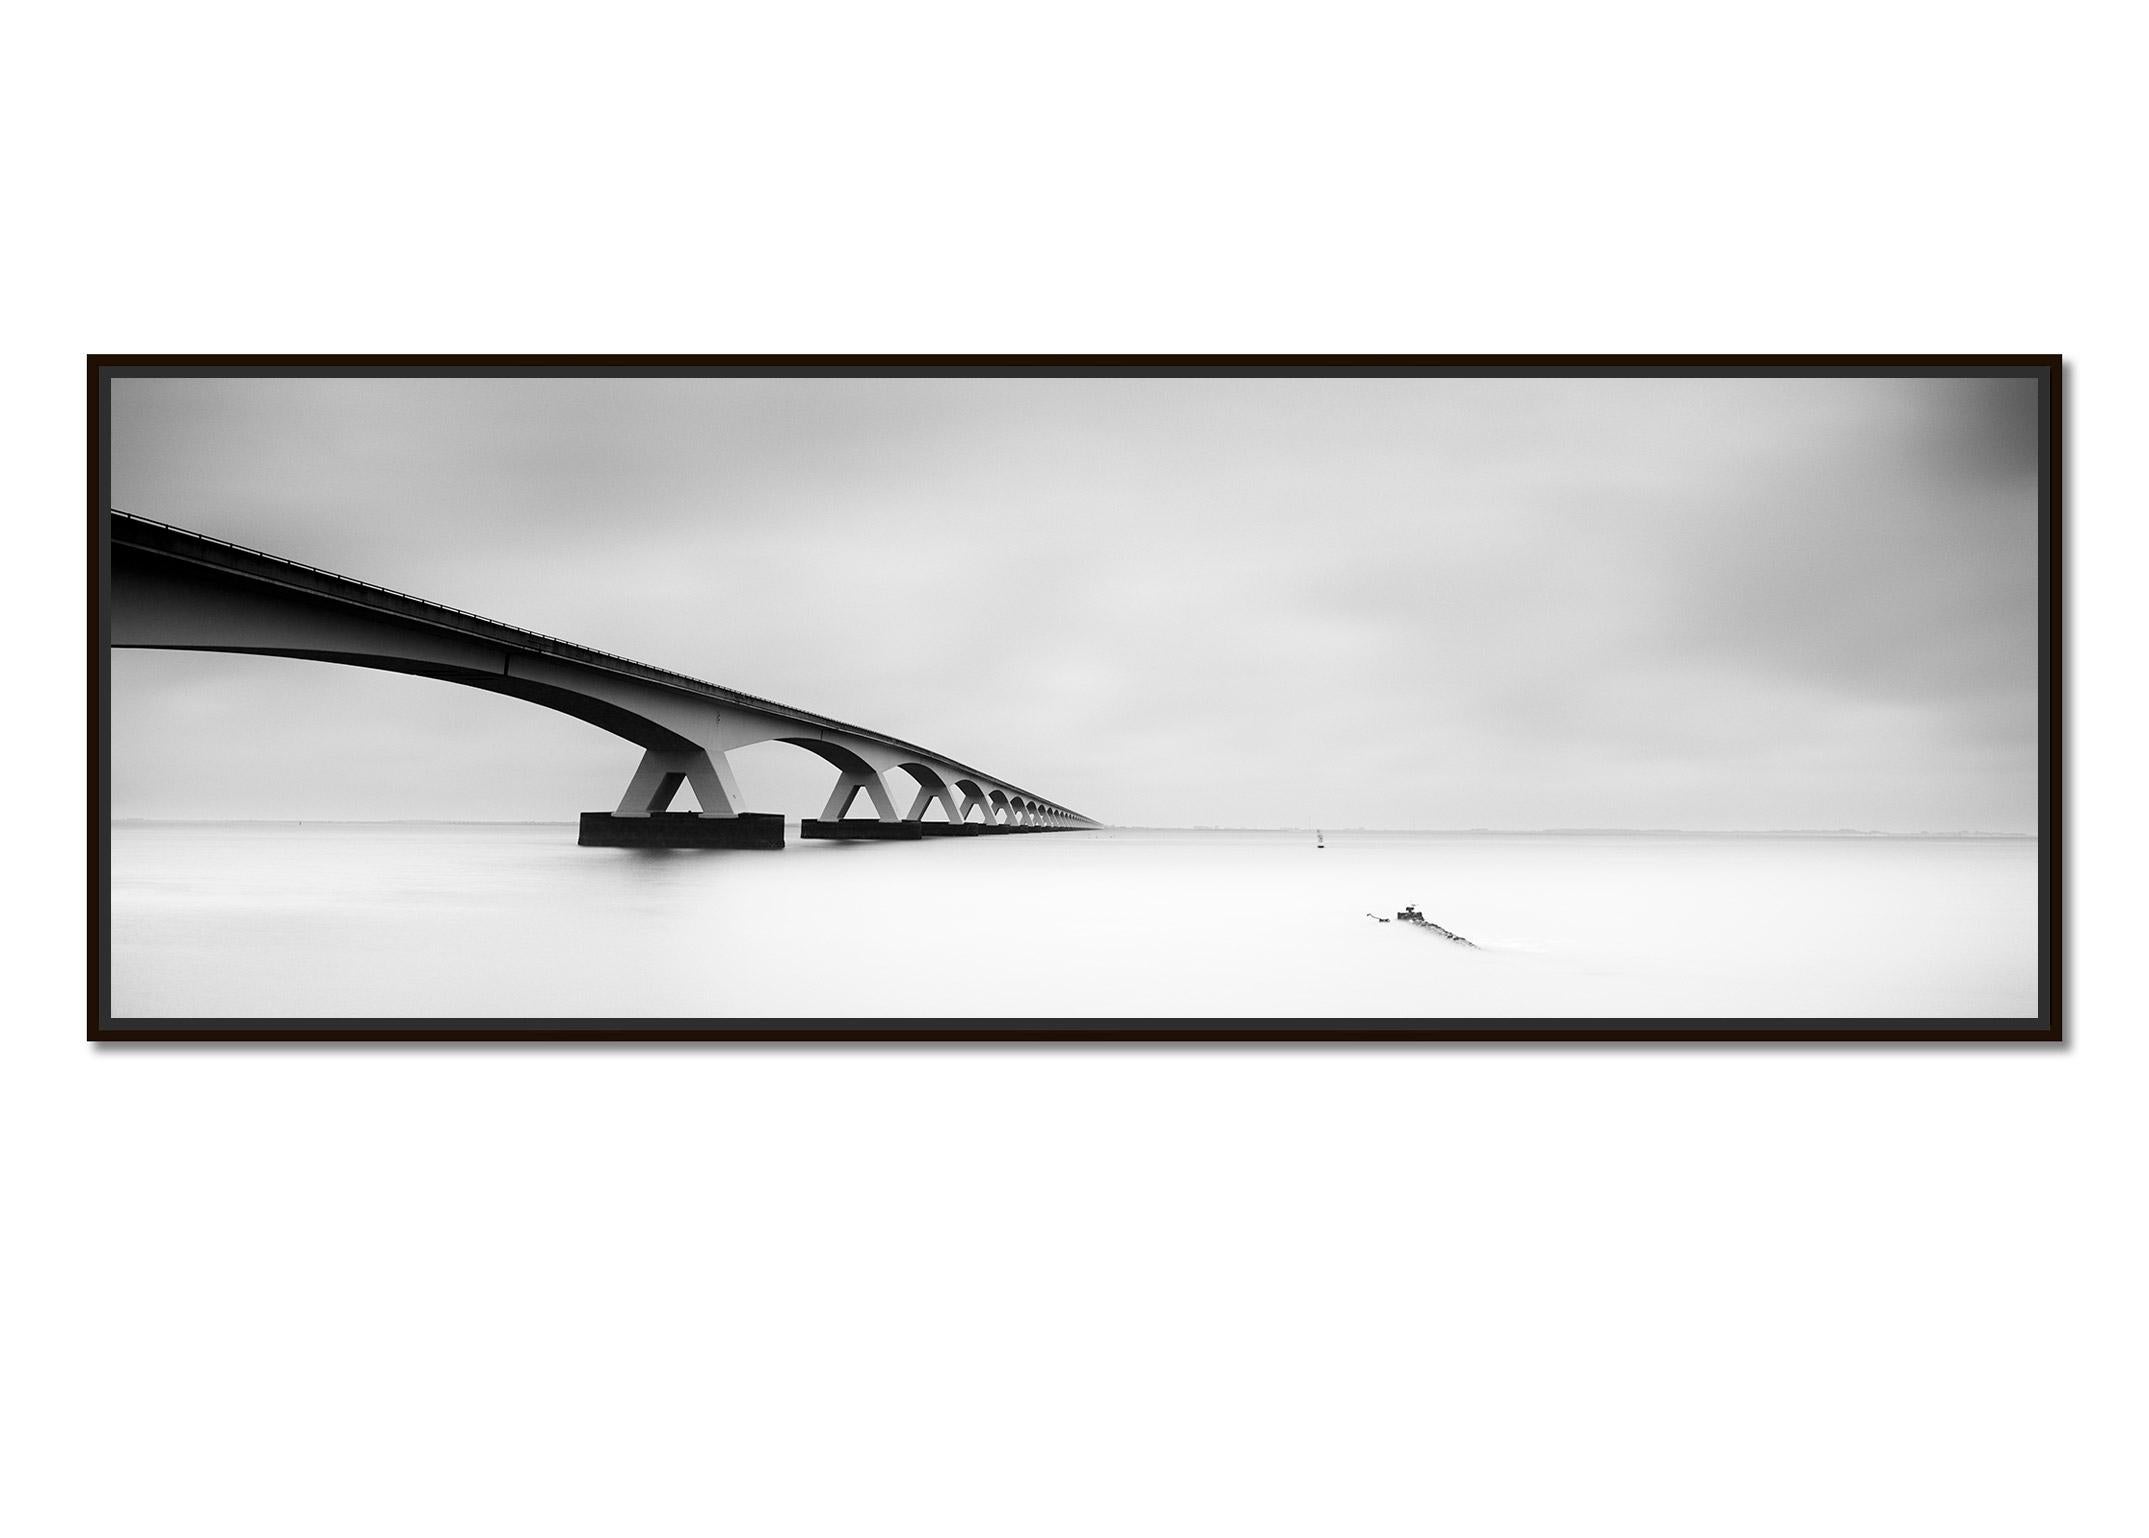 Zeeland Bridge Panorama, Netherlands, black and white waterscape art photography - Photograph by Gerald Berghammer